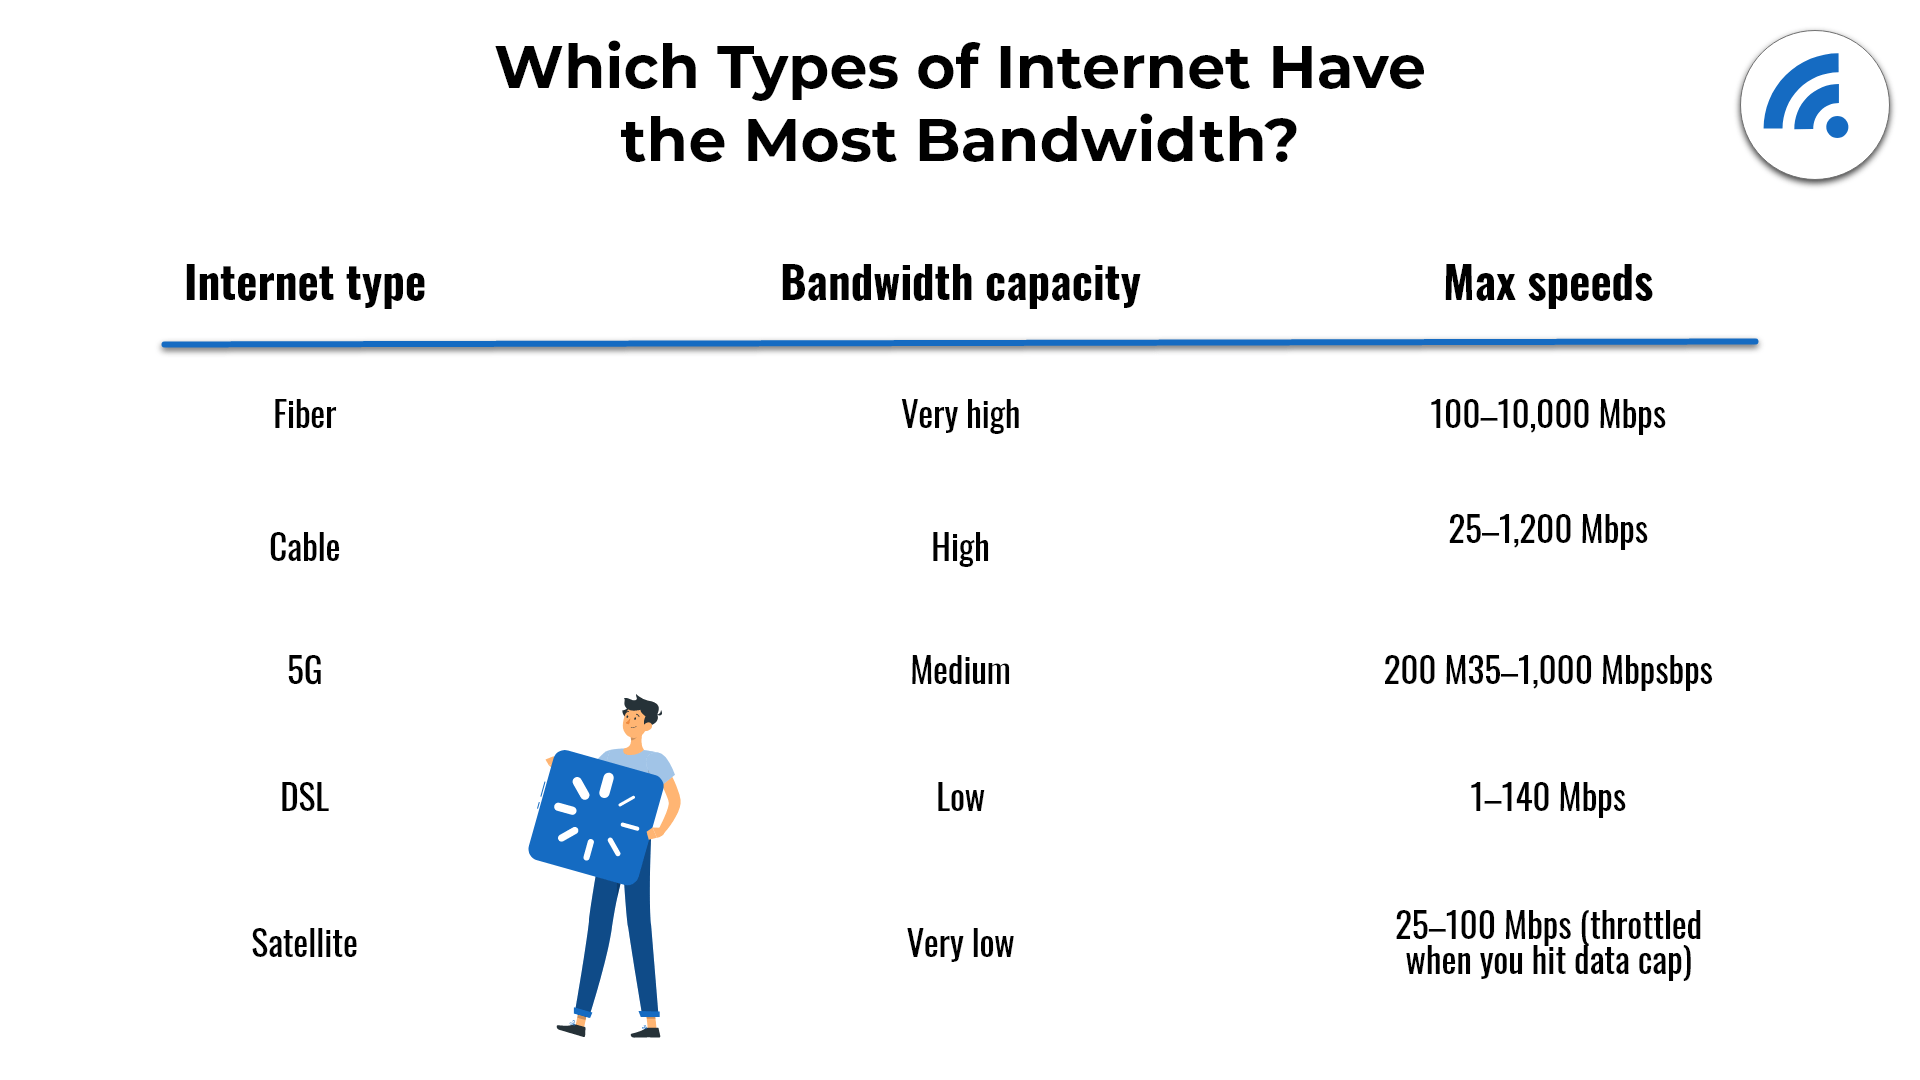 Types of internet with the most bandwidth